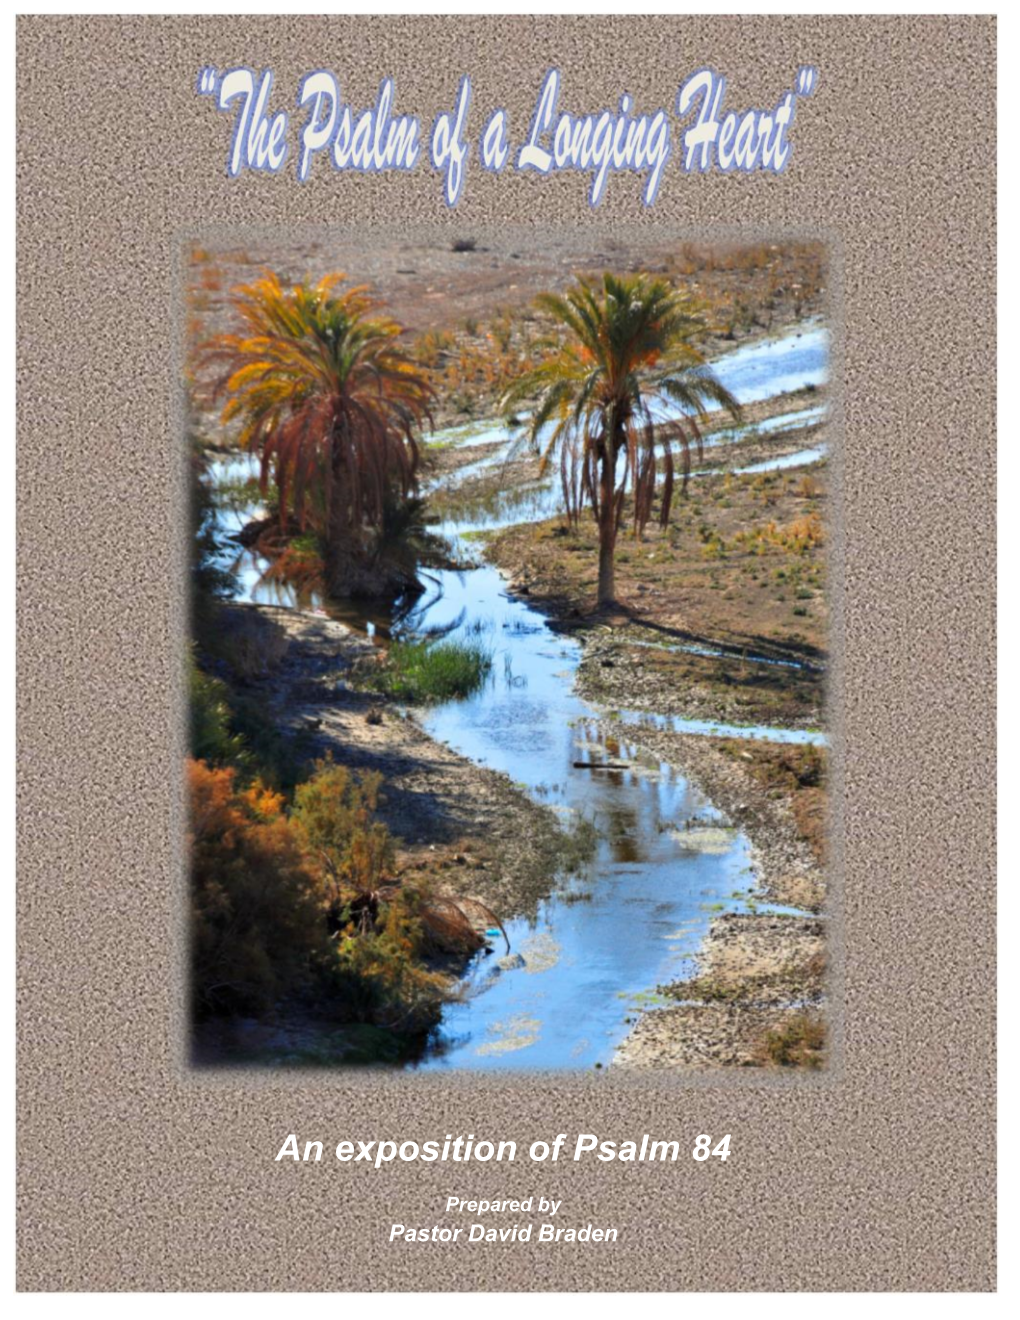 An Exposition of Psalm 84 1 Prepared by Pastor David Braden